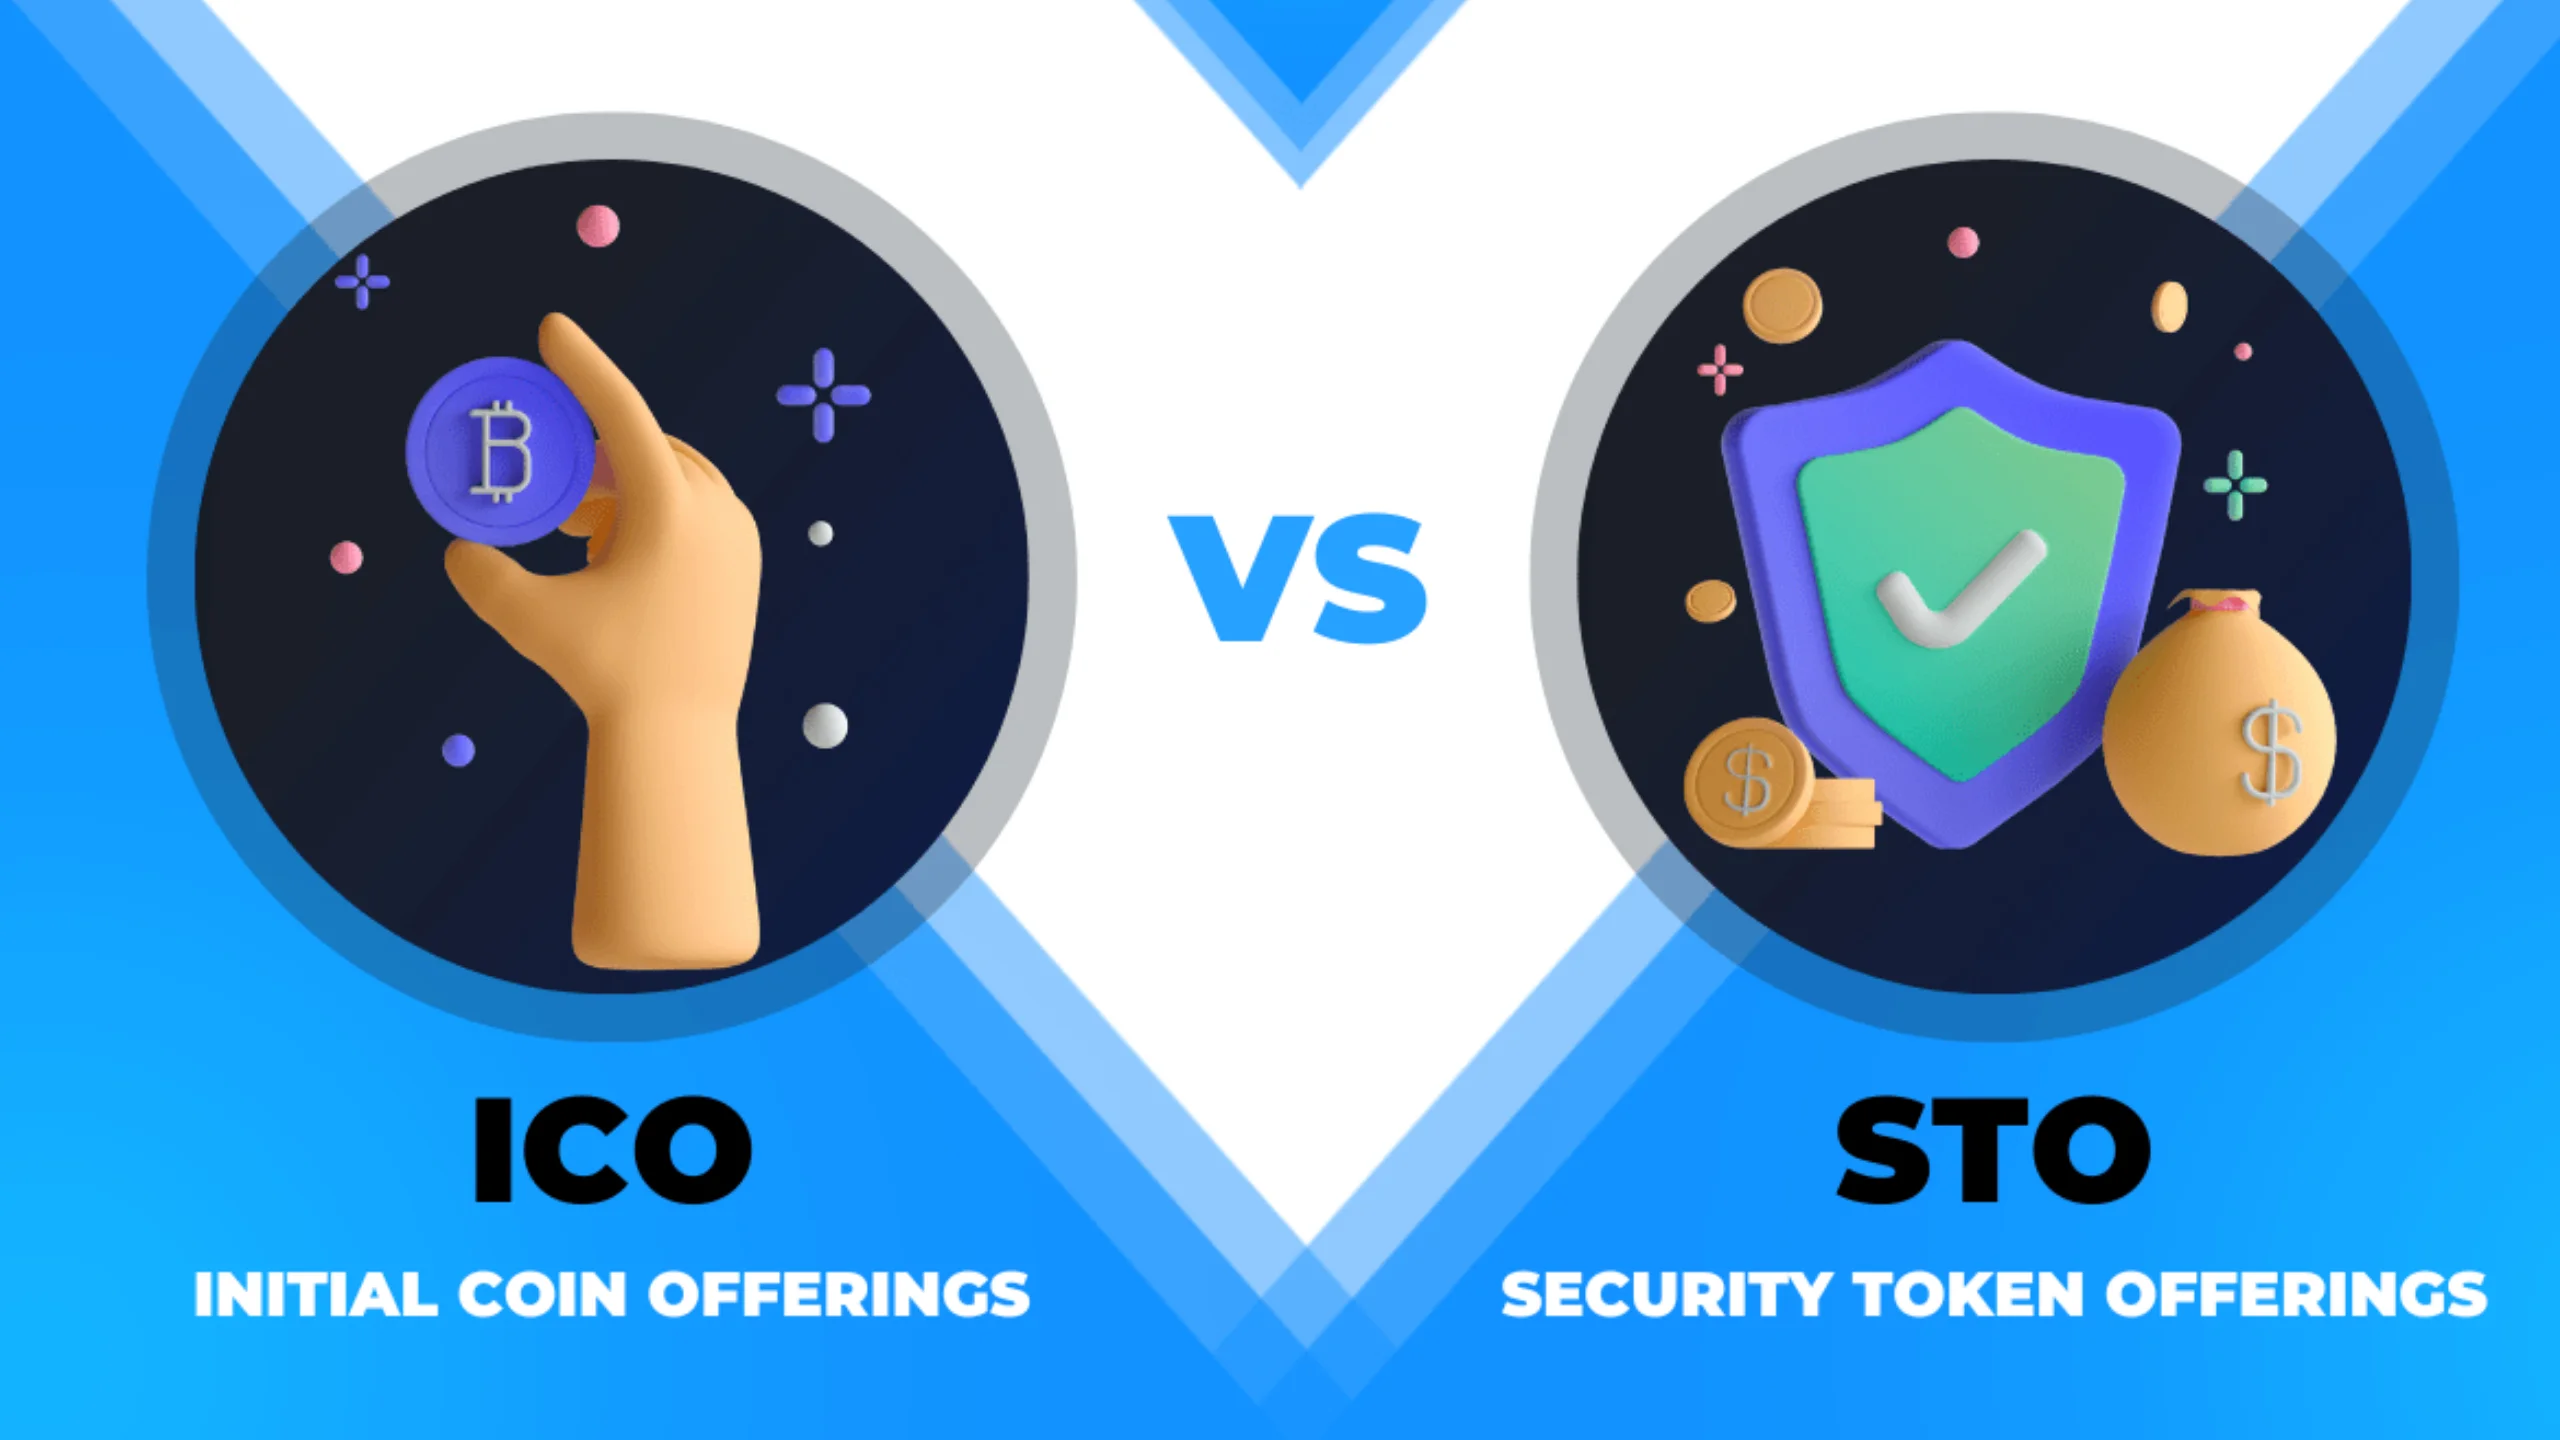 Difference Between ICOs and STOs: ICOs (Initial Coin Offerings) focus on utility tokens, while STOs (Security Token Offerings) involve regulatory-compliant security tokens.